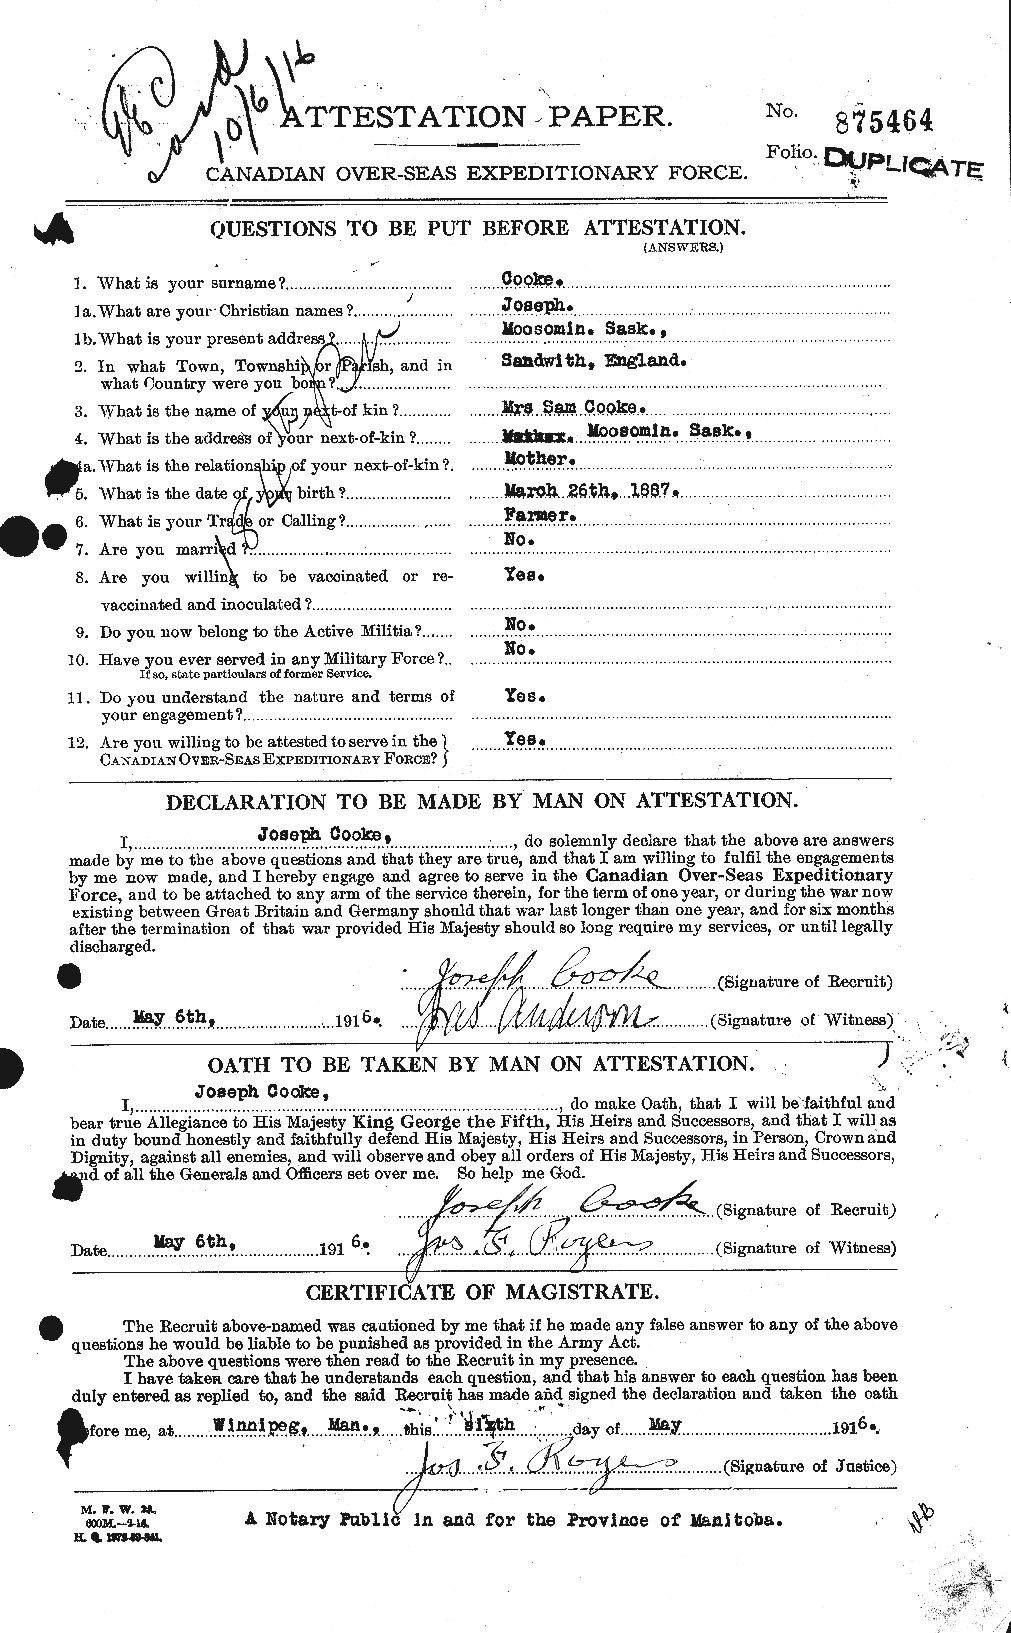 Personnel Records of the First World War - CEF 075925a